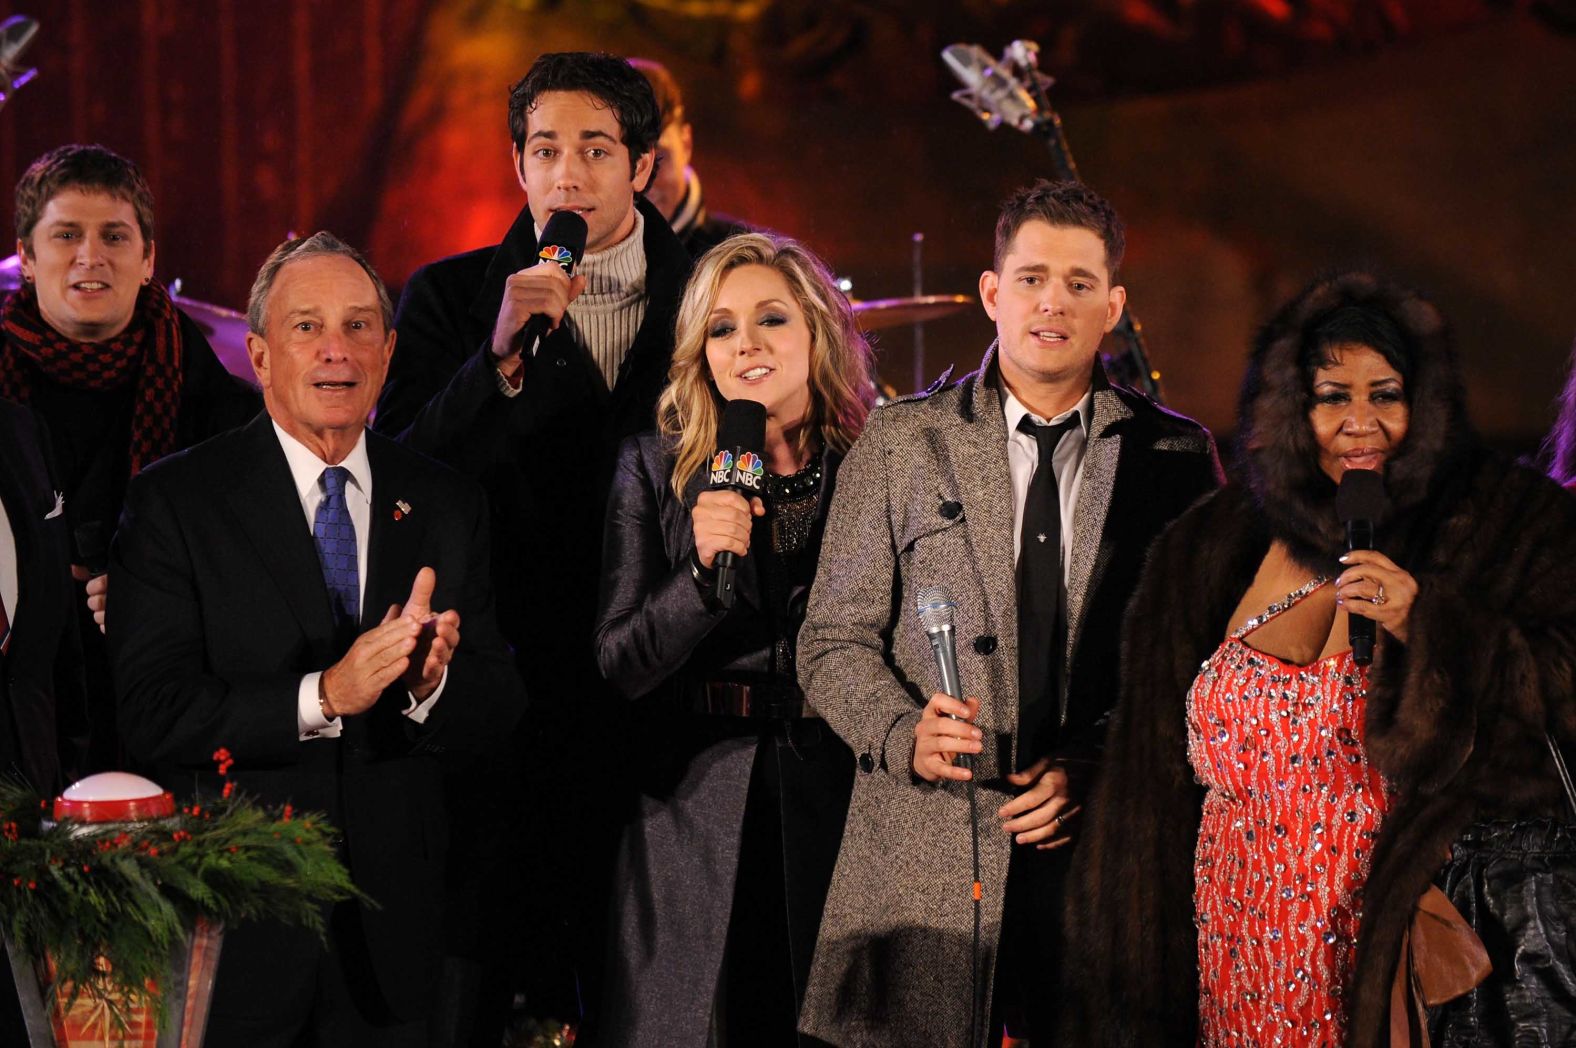 Musician Rob Thomas, Former New York City Mayor Michael Bloomberg, actor Zach Levi, actress Jane Krakowski, singer Michael Buble and Franklin at the Rockefeller Center Christmas tree lighting ceremony in 2009.